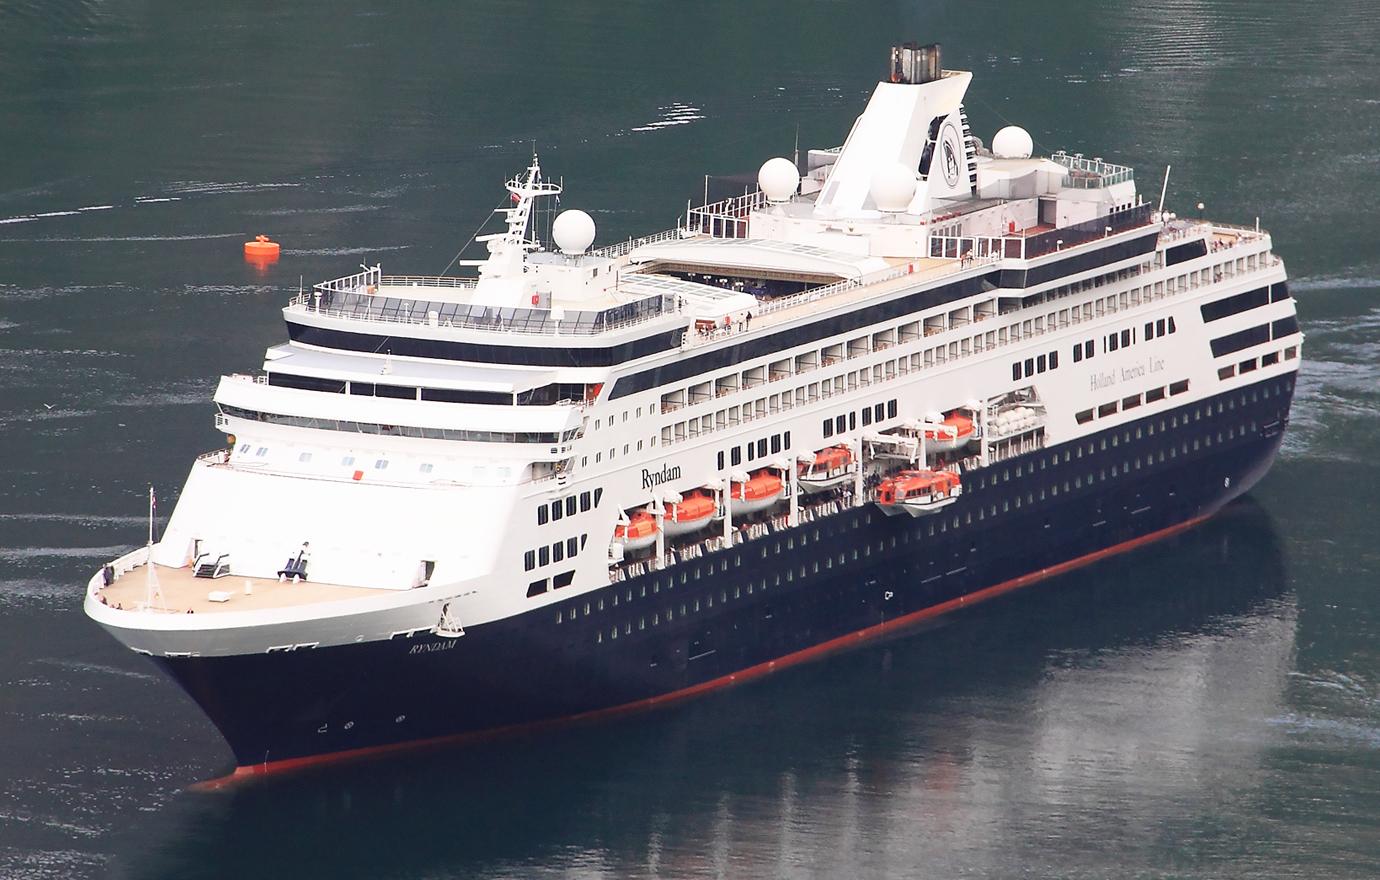 10 Horrifying True Crimes Committed On Cruise Ships